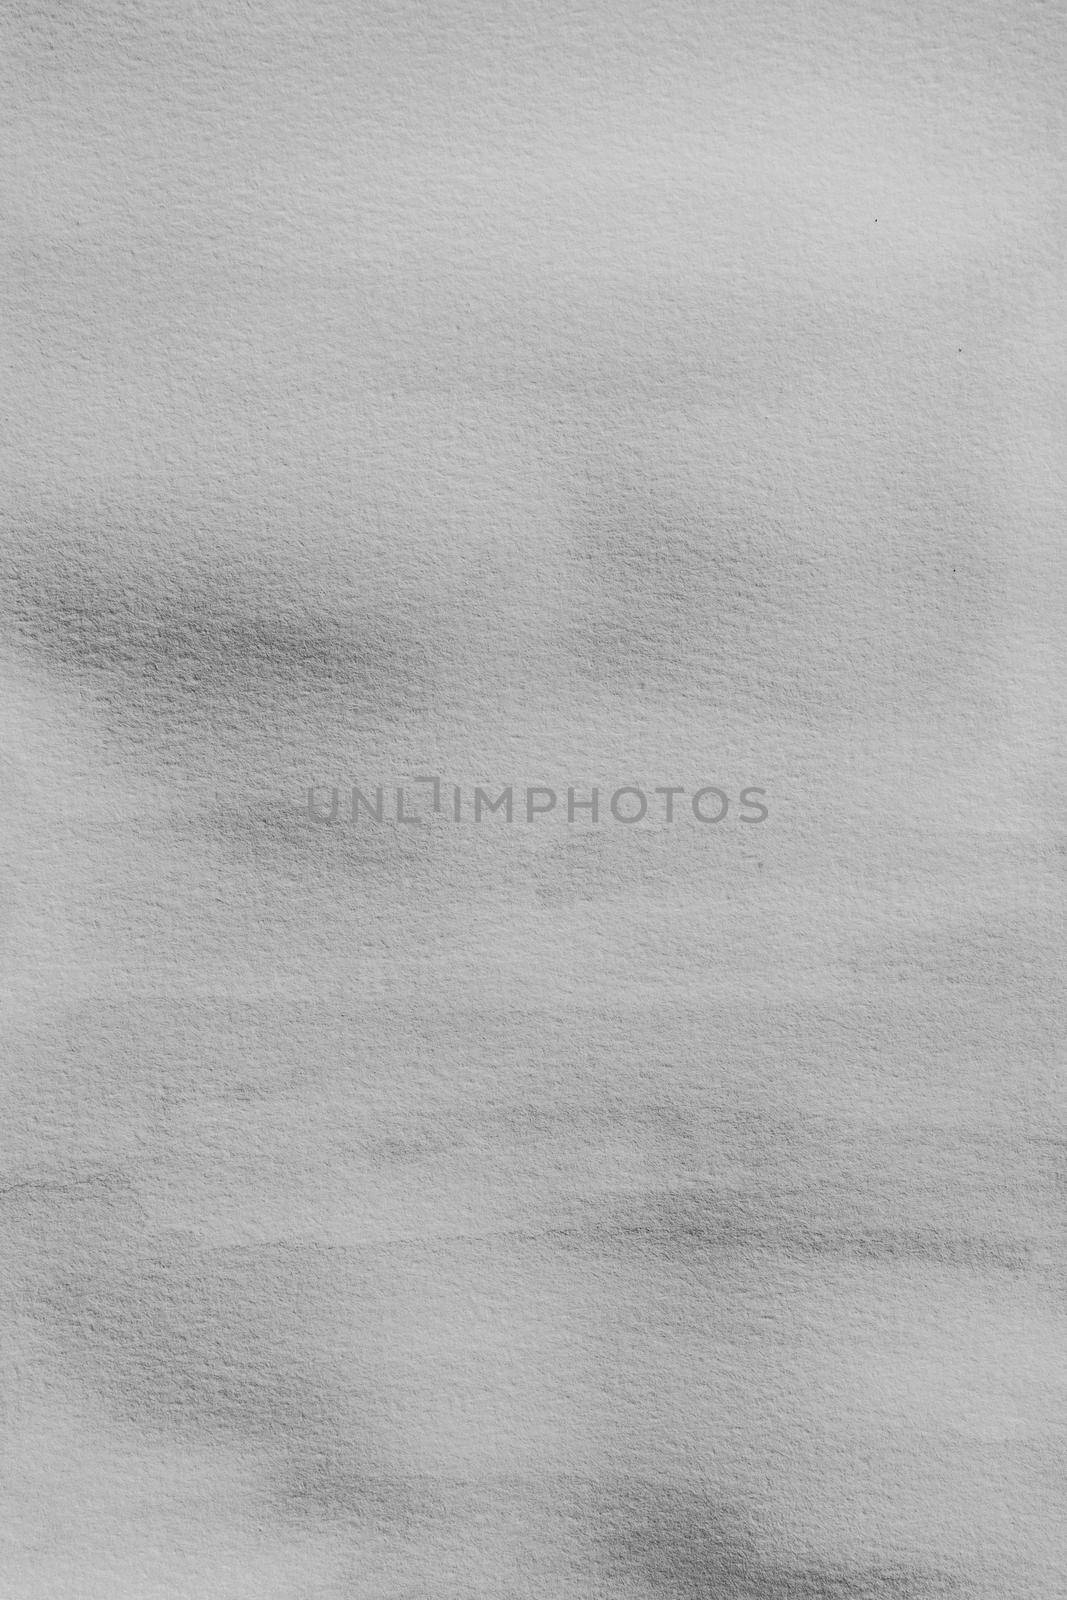 Abstract black and white watercolor on paper texture wallpaper. by Suwant